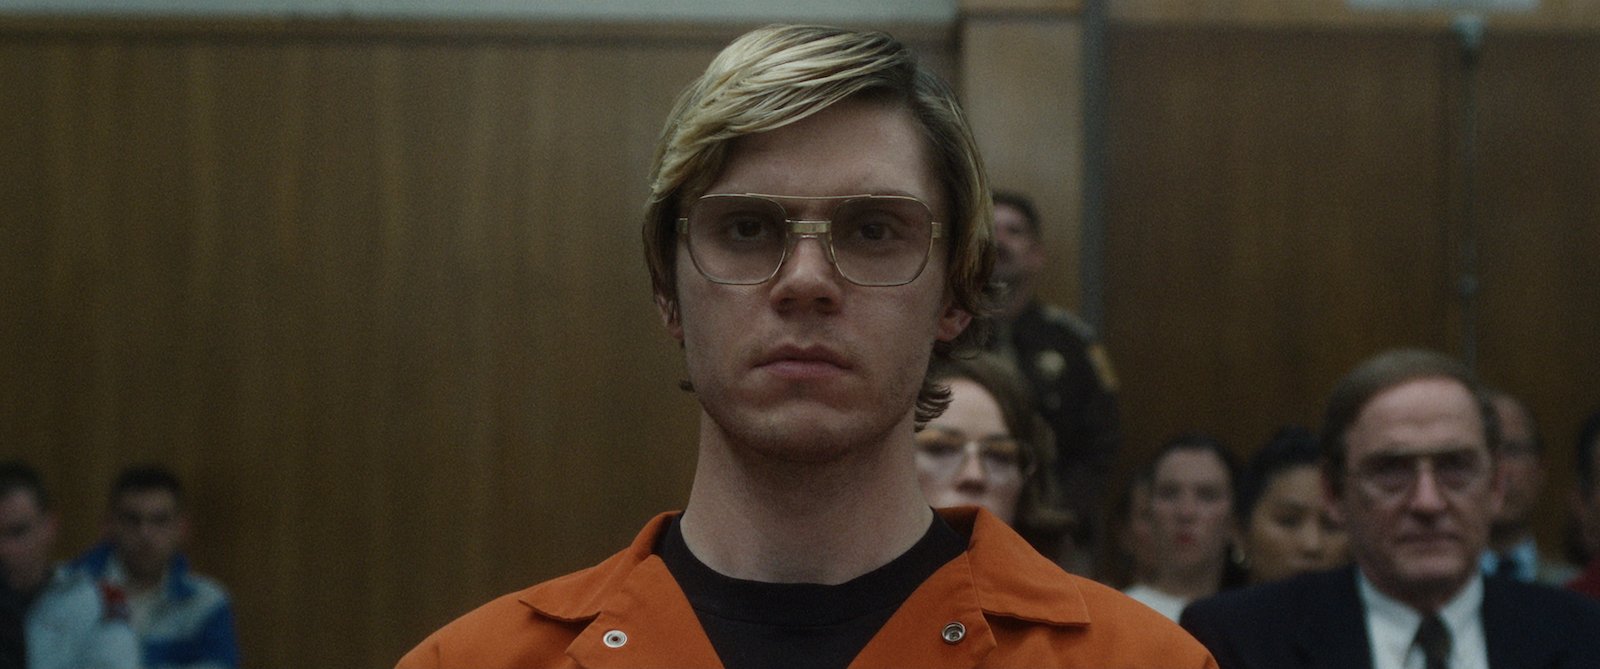 Even Peters - DAHMER - Monster - The Jeffrey Dahmer Story